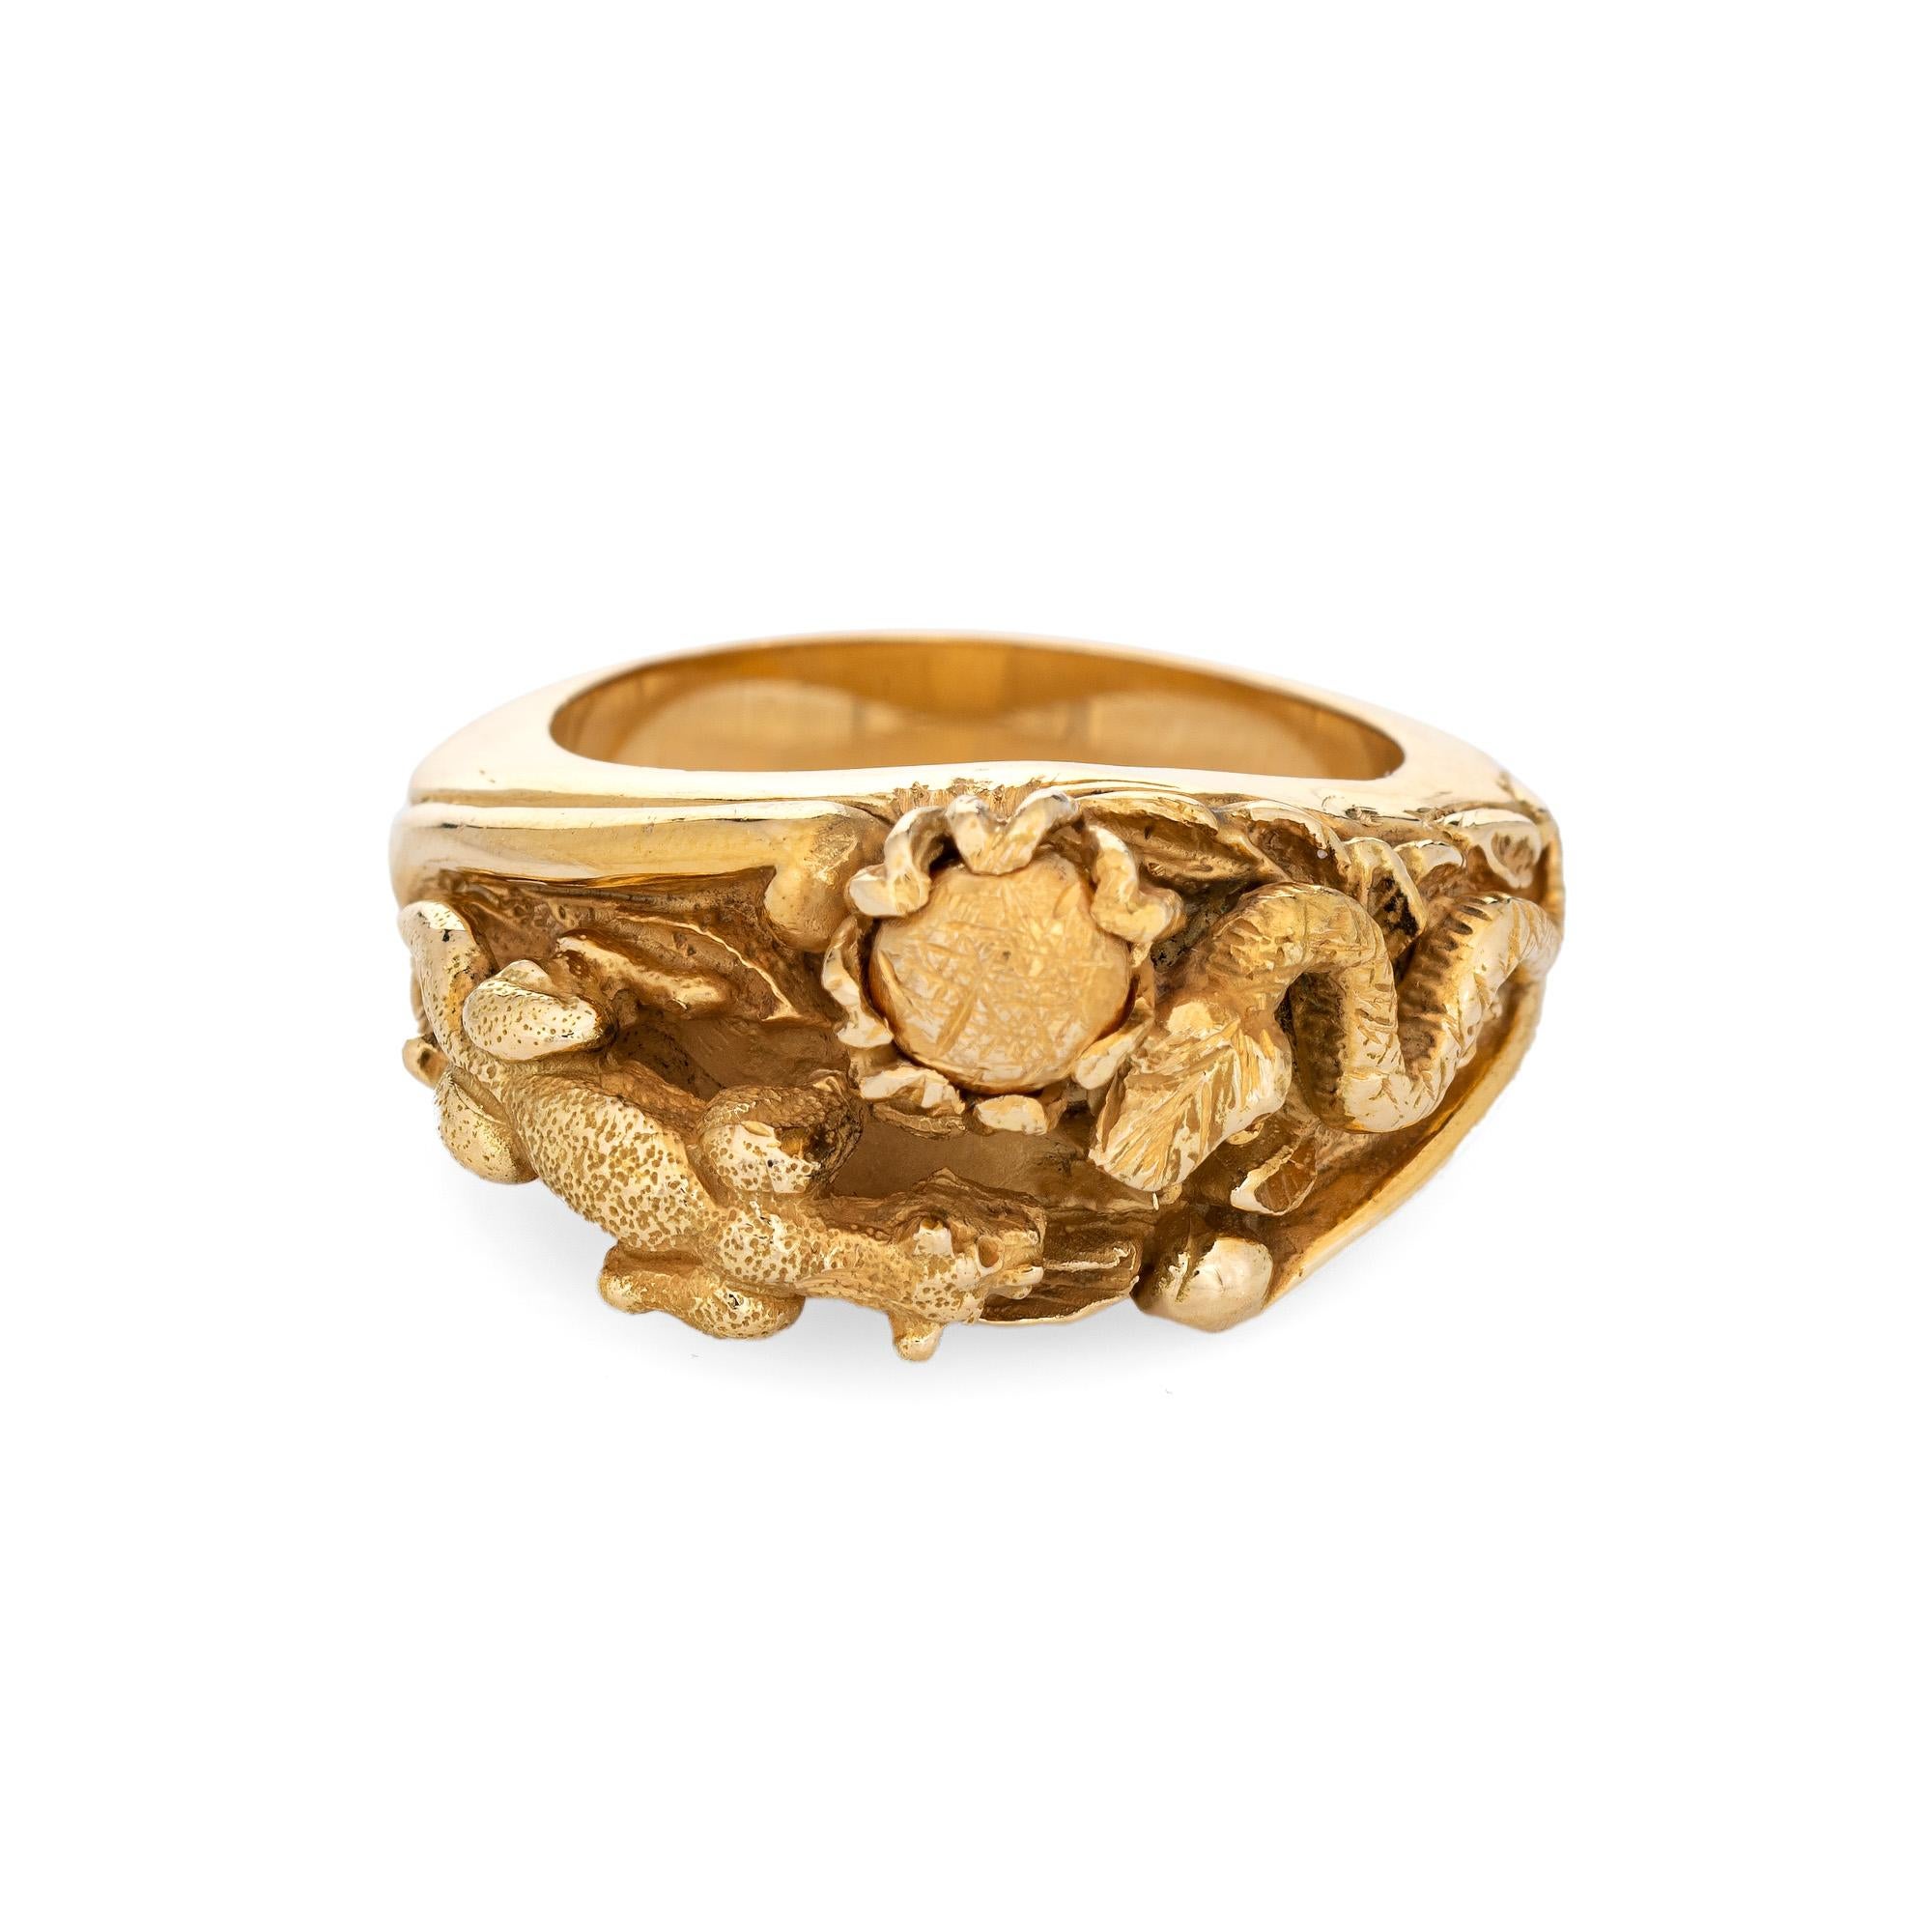 Finely detailed panther & snake ring crafted in 18 karat yellow gold. 

The elaborate and beautifully detailed ring highlights a panther perched in a predatory position to steal the eggs from the snake's nest. The coiled snake sits in a protective